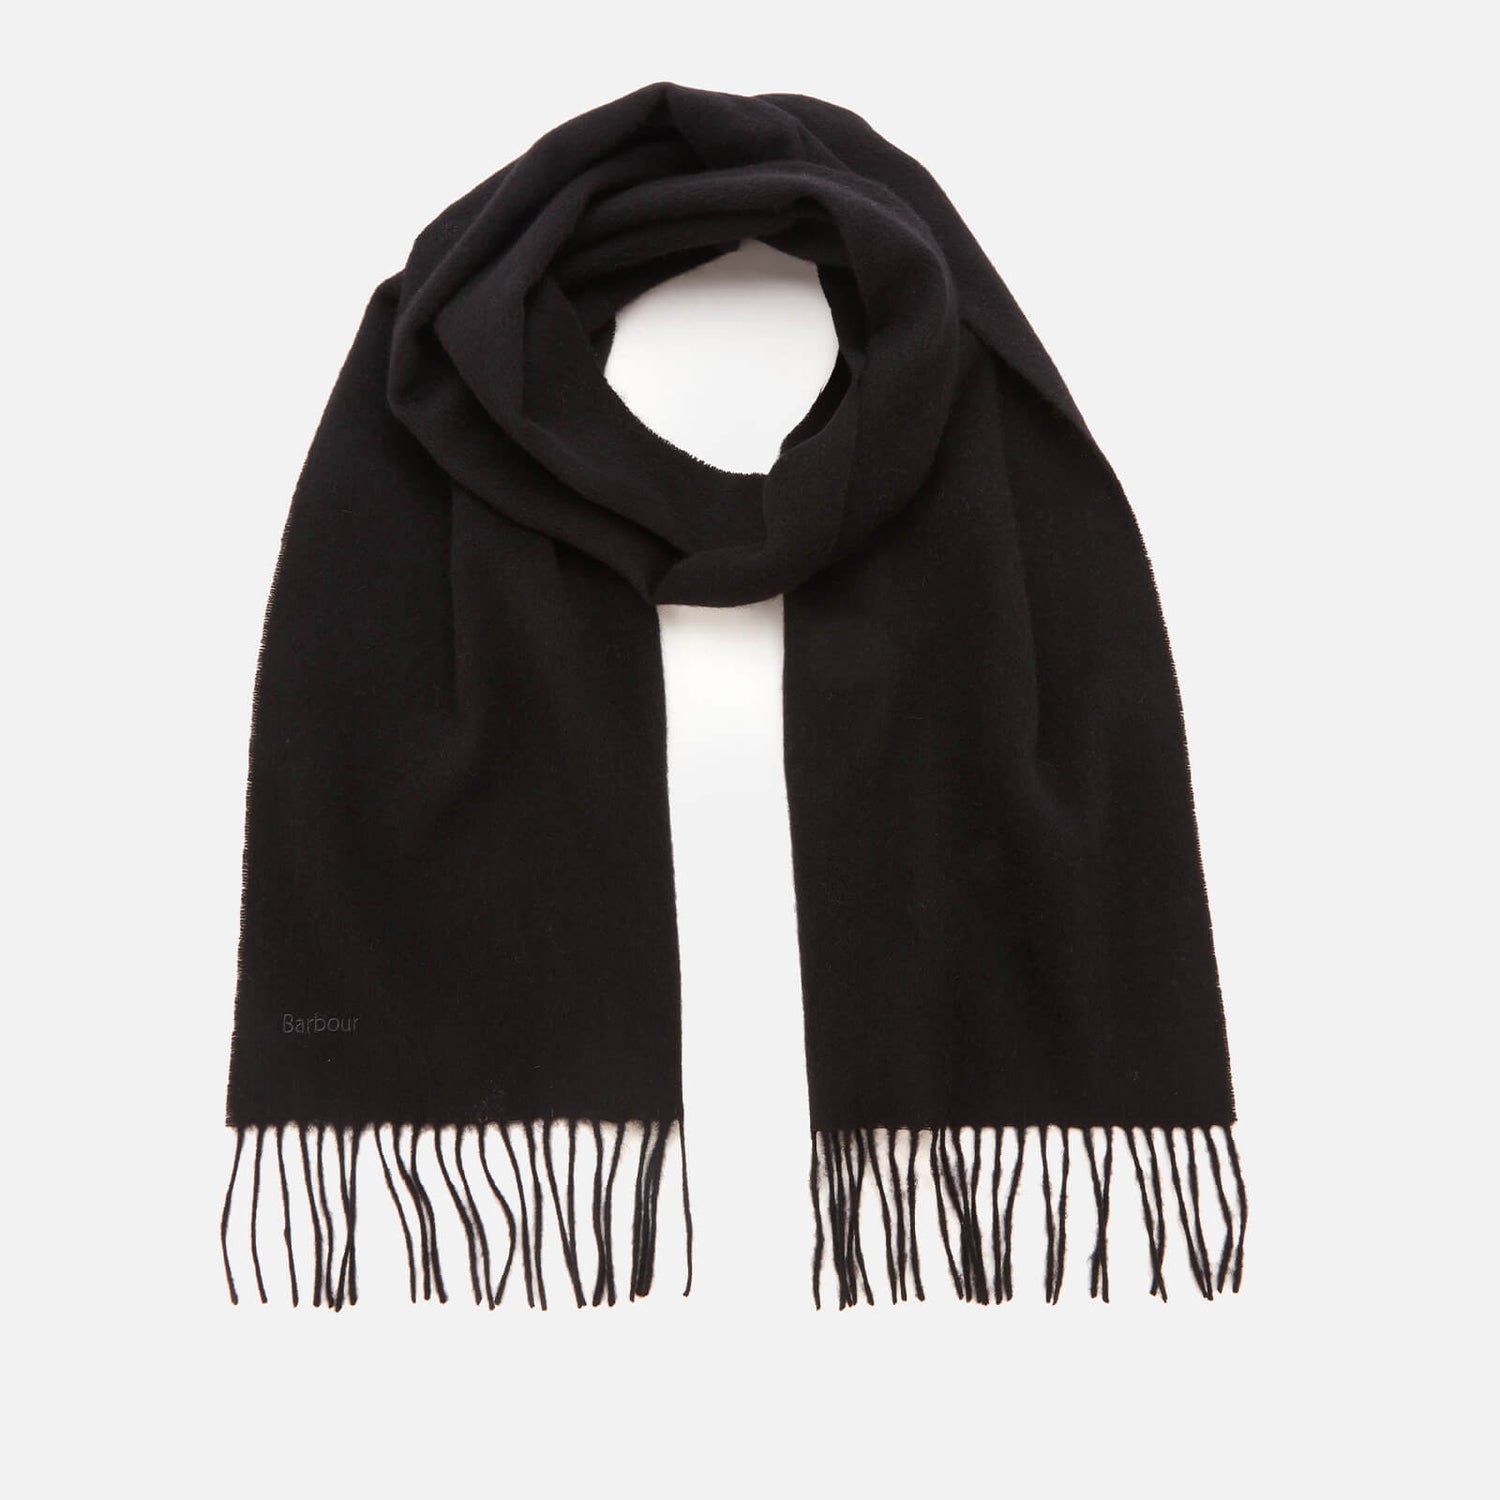 Barbour Casual Women's Lambswool Woven Scarf - Black | TheHut.com